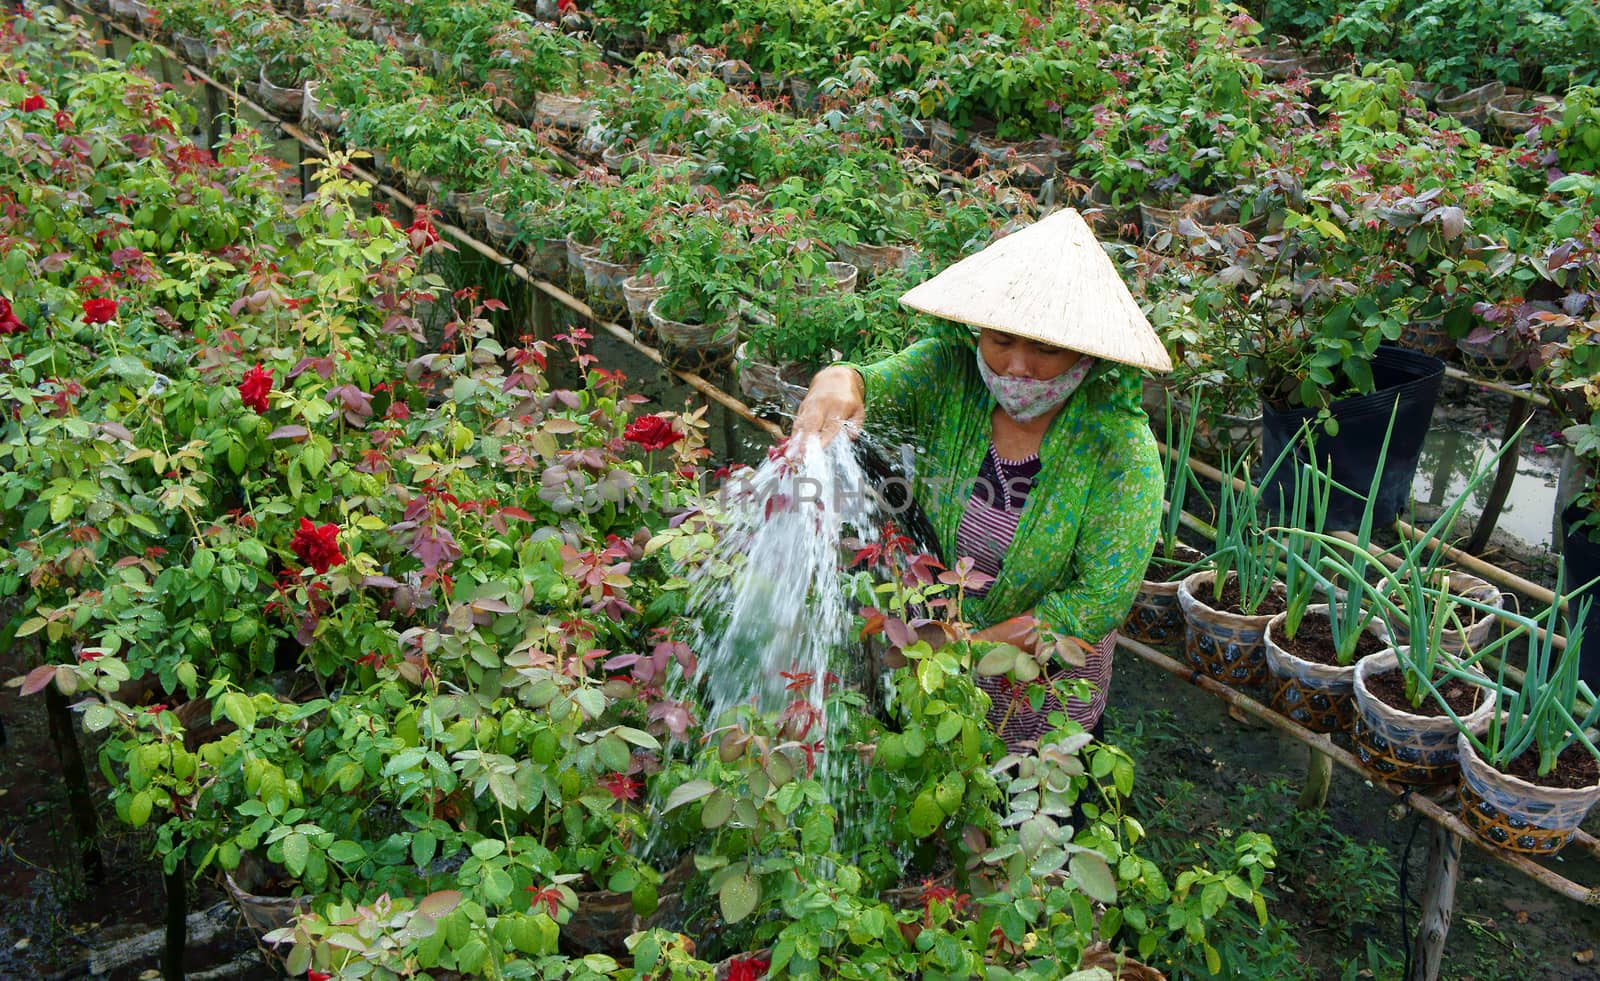 SA DEC, VIET NAM - JAN 26: Vietnamese farmer watering on flower garden, roses blossom in bright red, ready for tet (lunar new year) occasion in Sadec - place supply large flower- Vietnam, Jan 26, 2013